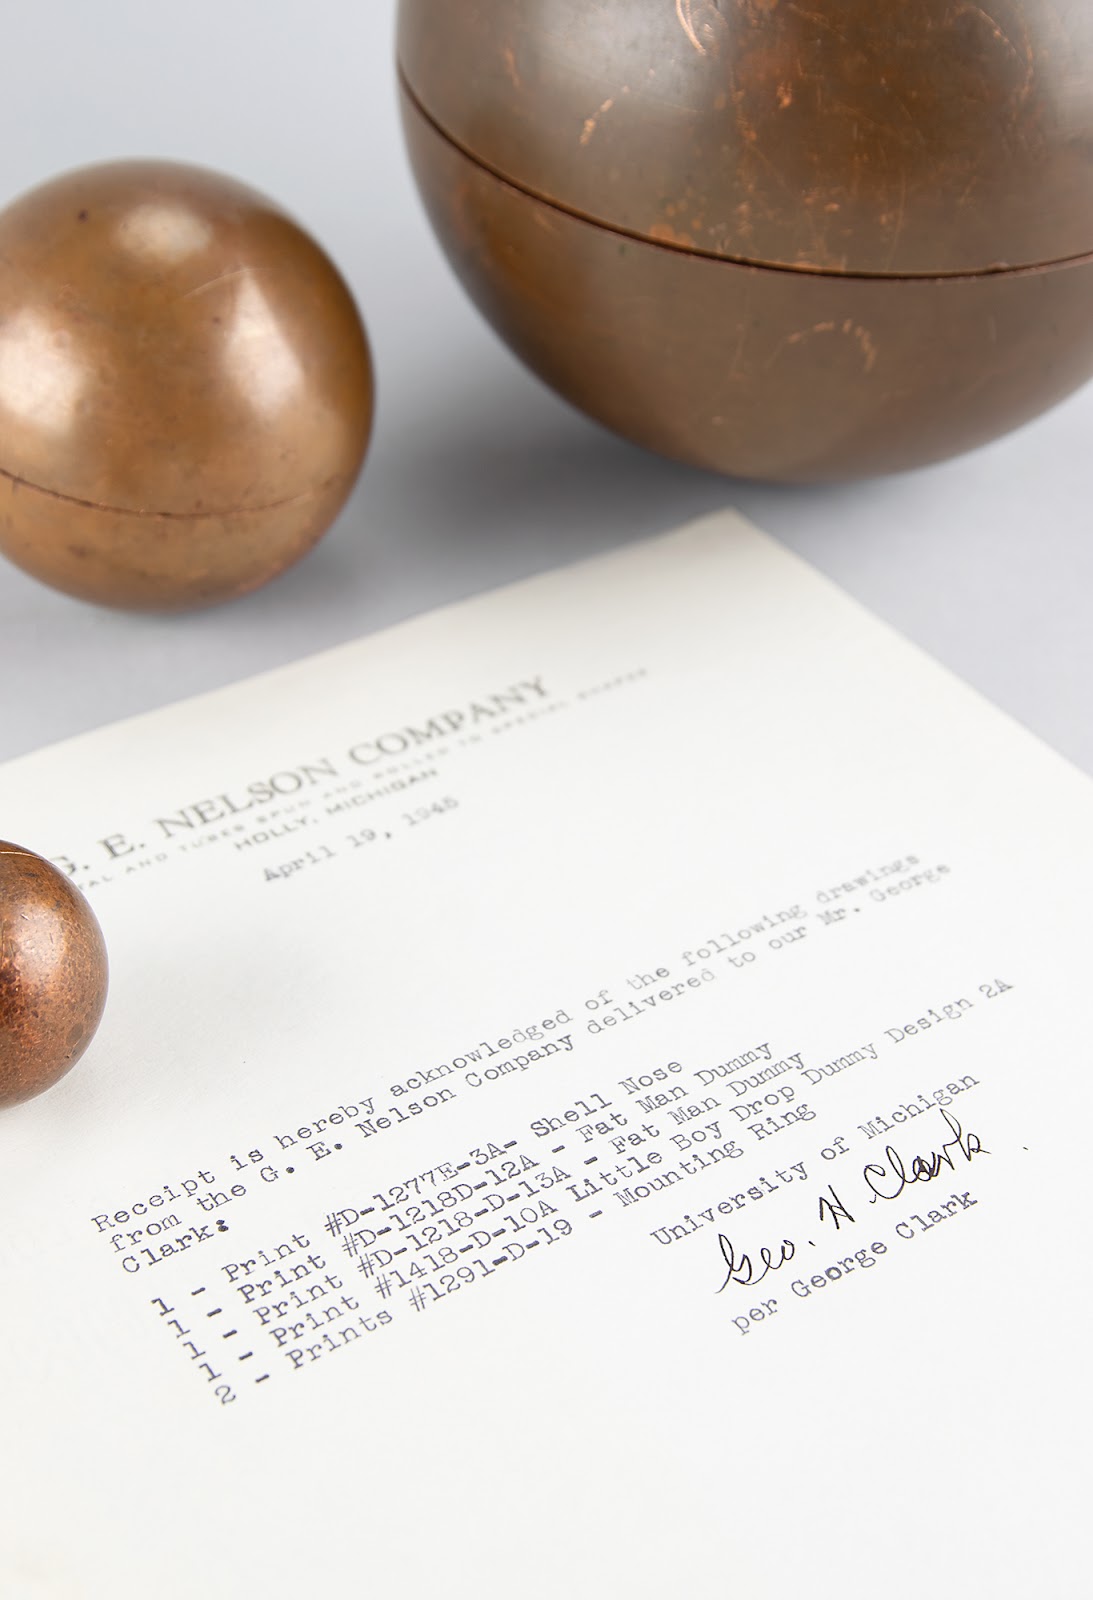 Three copper core spheres pictured with correspondence mentioning both atomic bombs from the Holly, Michigan-based G. E. Nelson Company.